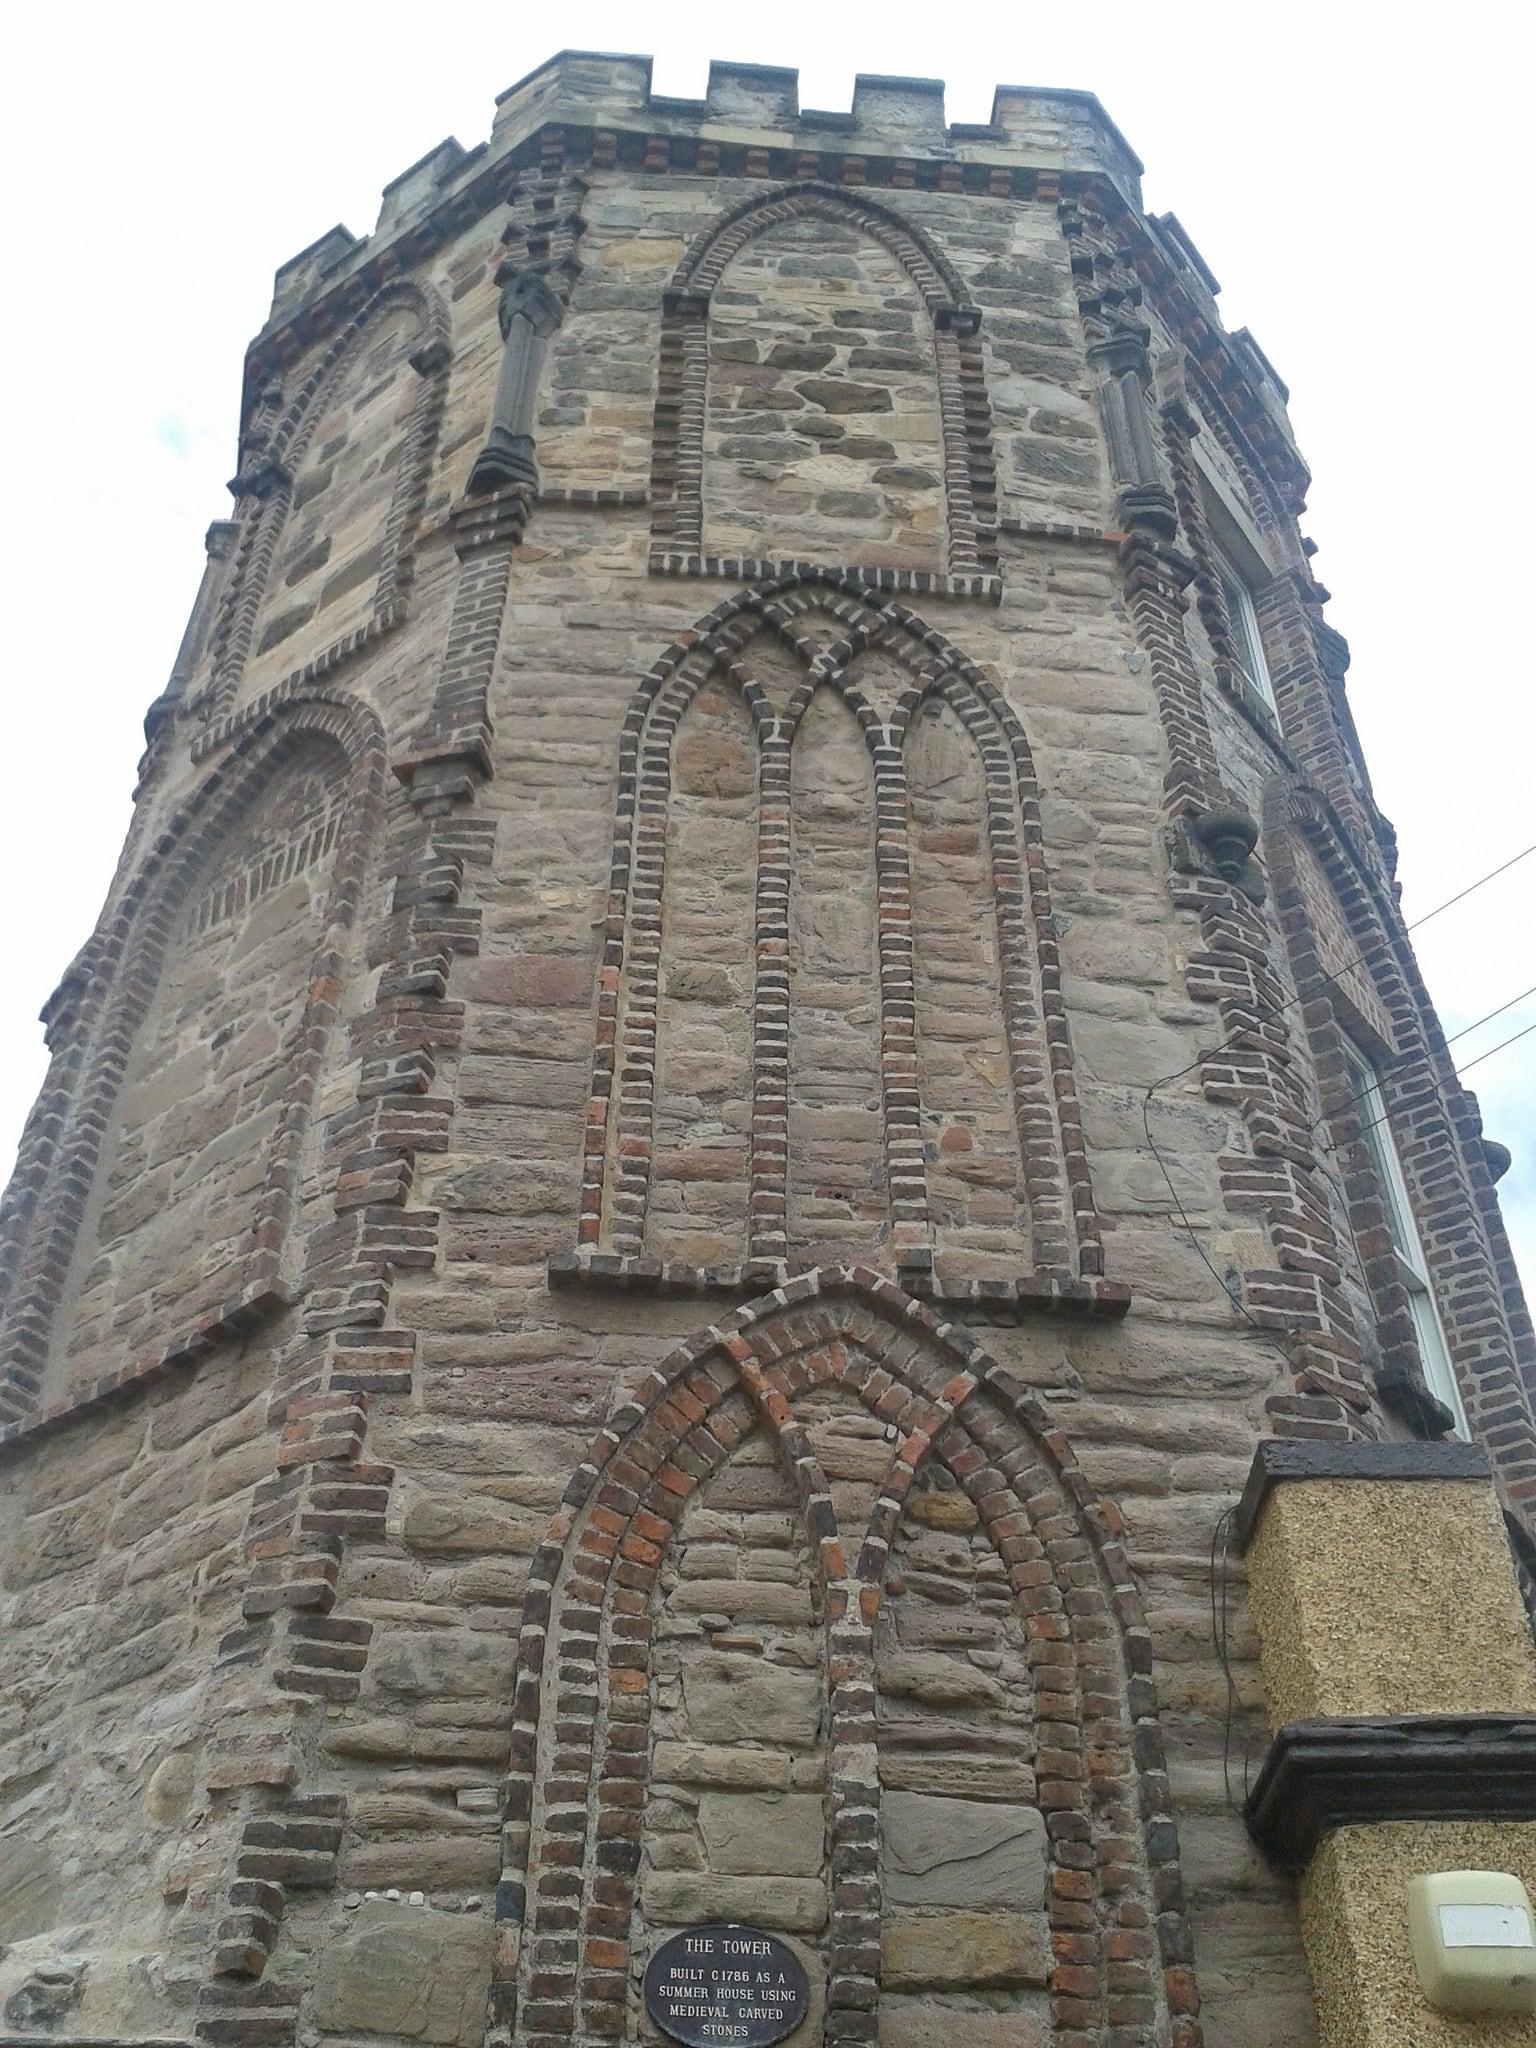 Image of The Tower. openplaques:id=31352